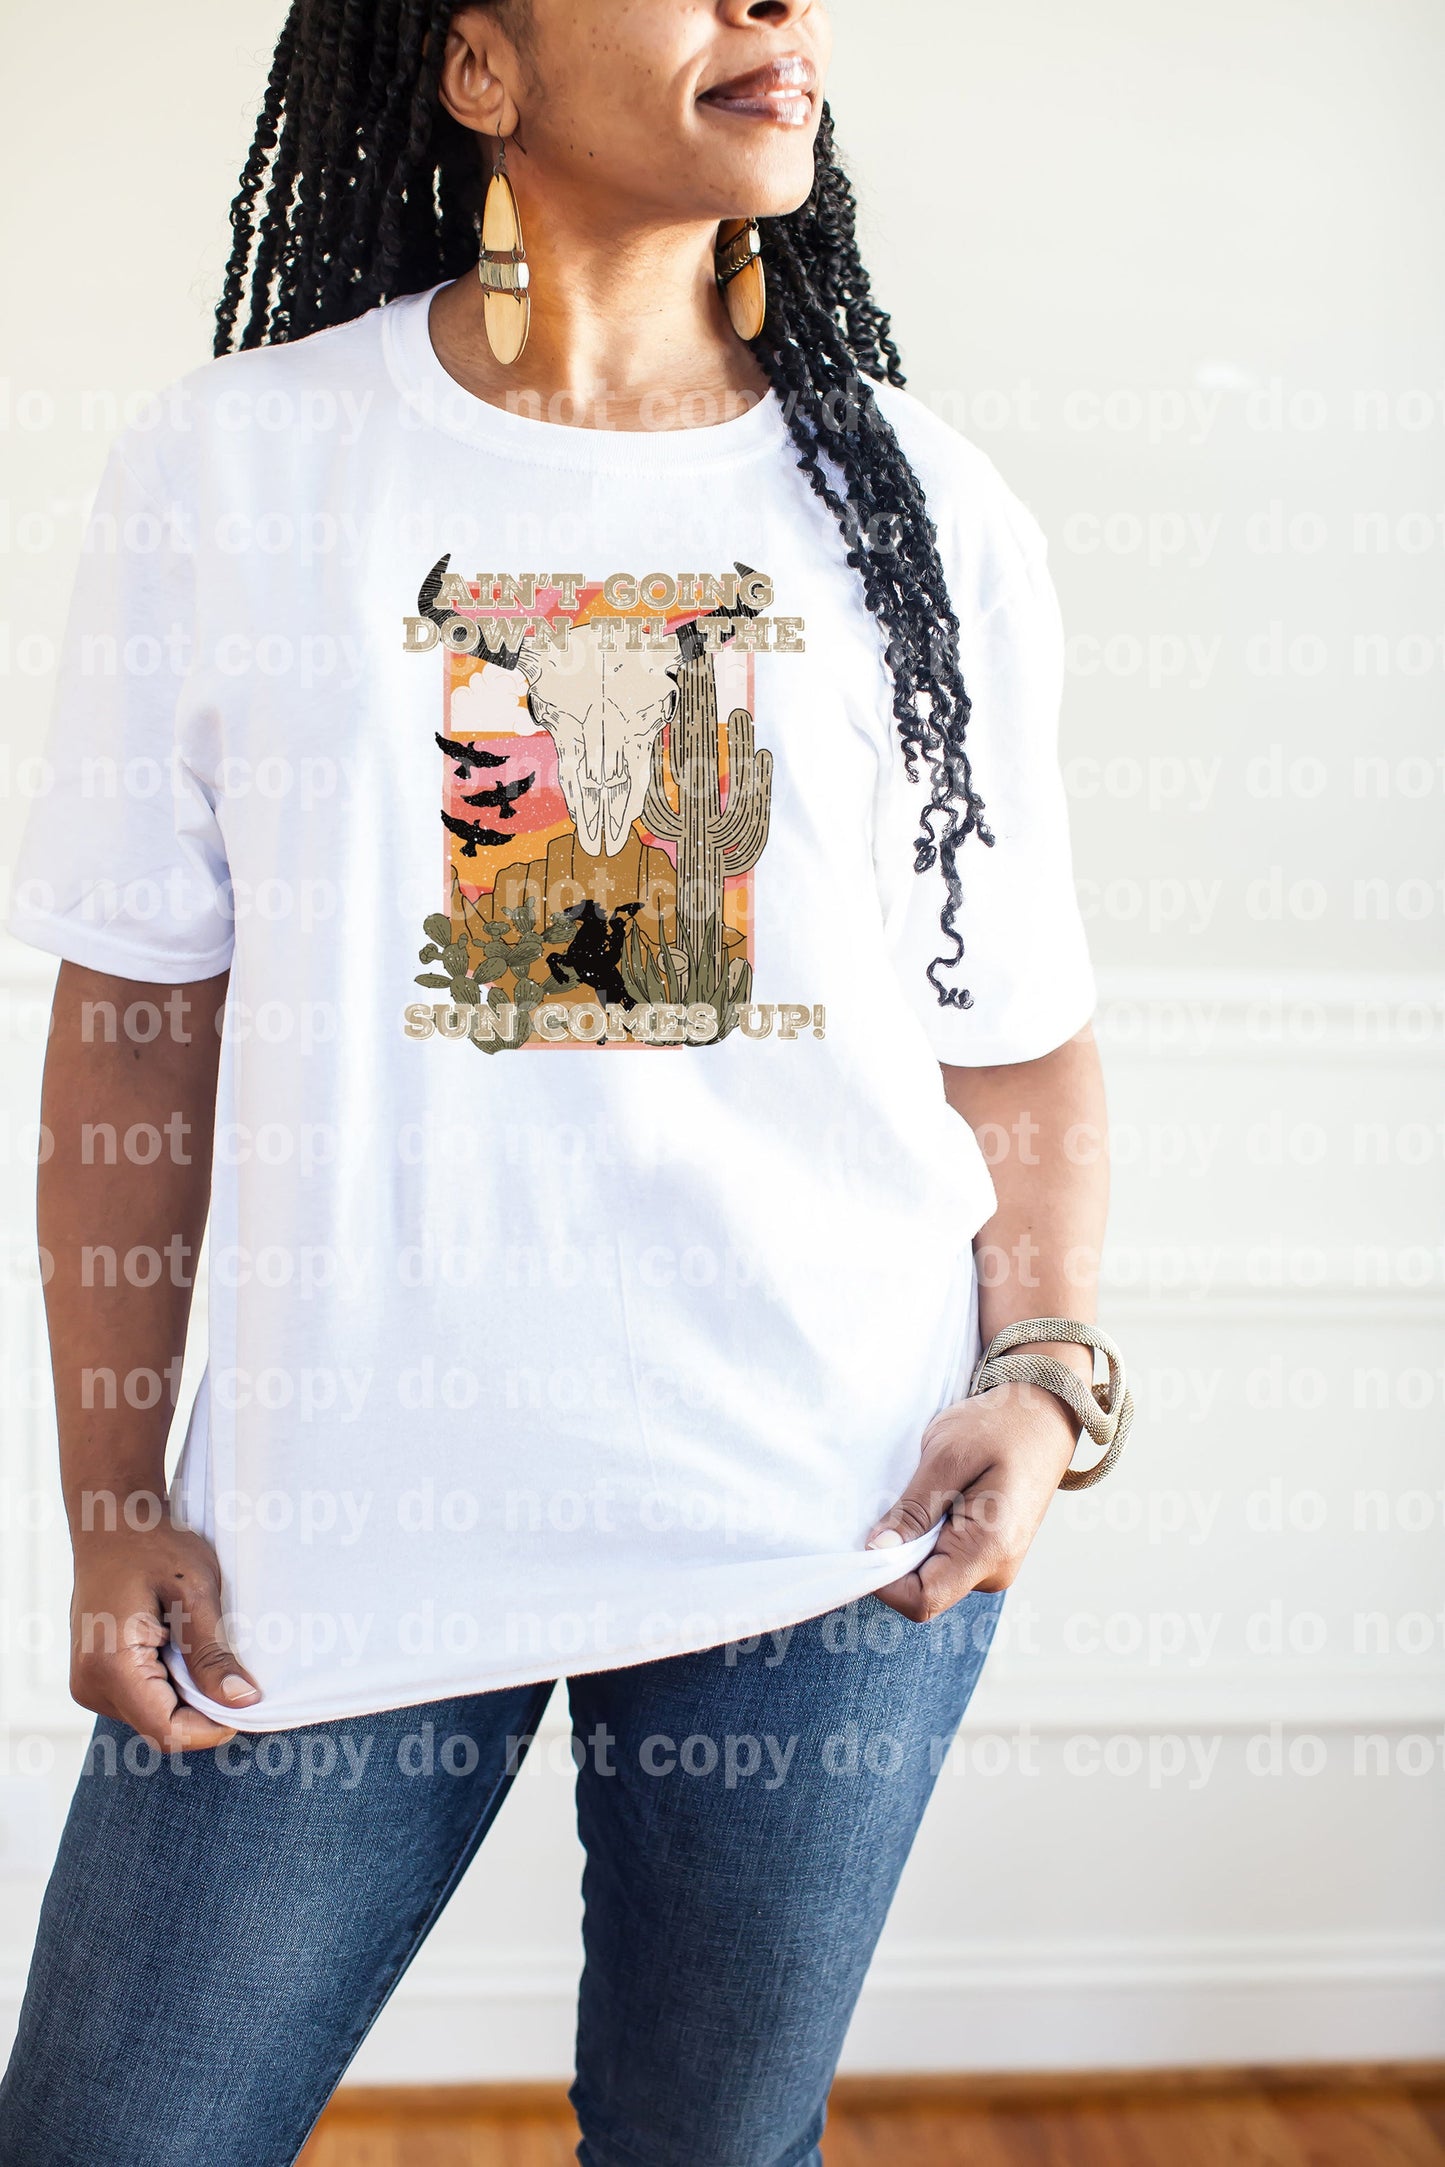 Ain't Going Down Til The Sun Comes Up Dream Print or Sublimation Print